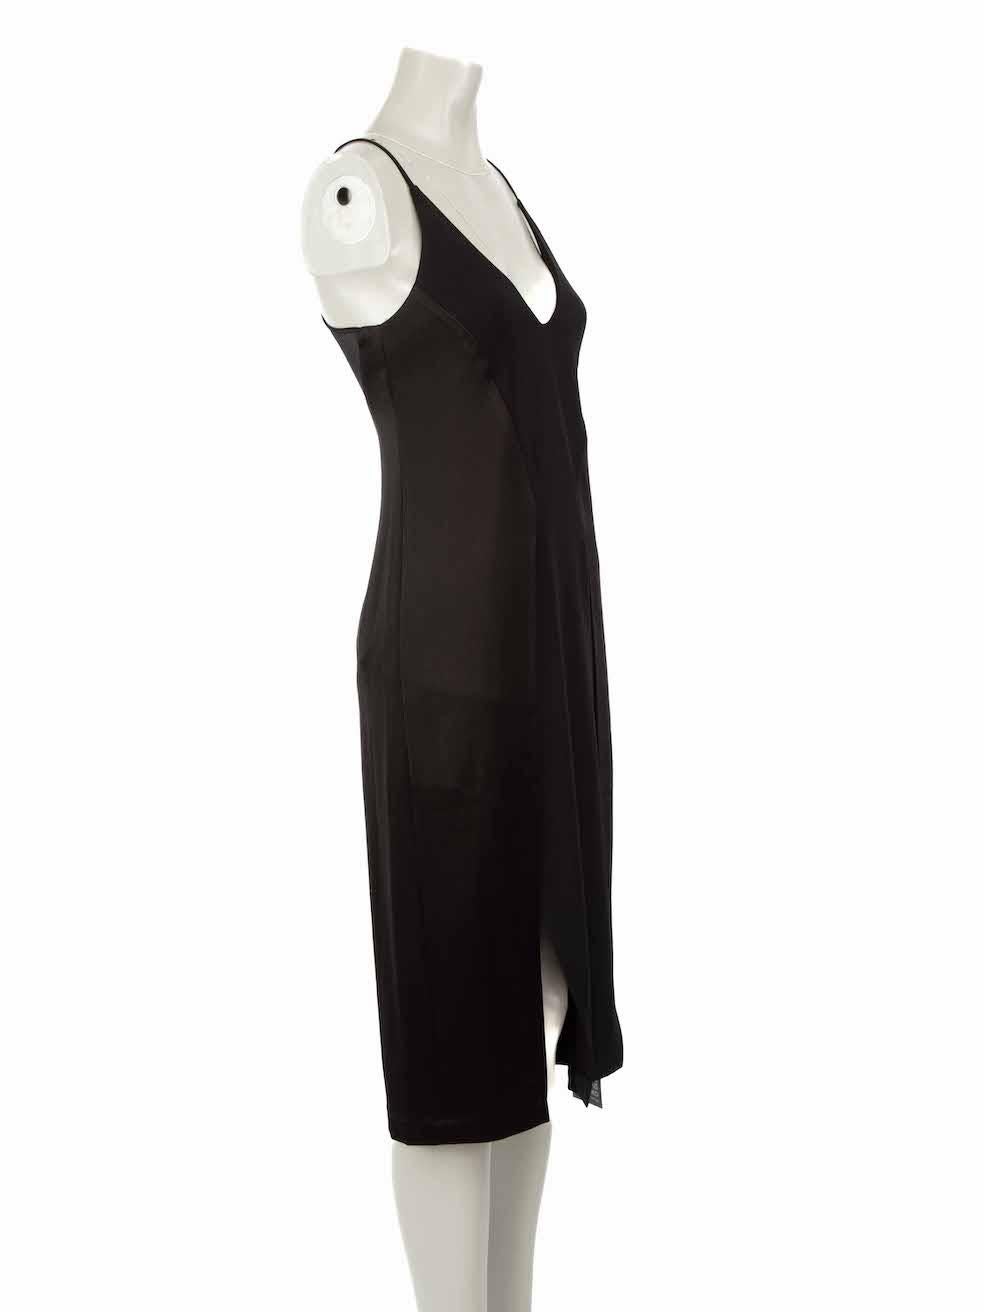 CONDITION is Never worn, with tags. No visible wear to dress is evident on this new Halston Heritage designer resale item.
 
Details
Black
Synthetic
Dress
Sleeveless
Racer back
V-neck
Midi
Panelled leg slit
Side zip and hook fastening
 
Made in